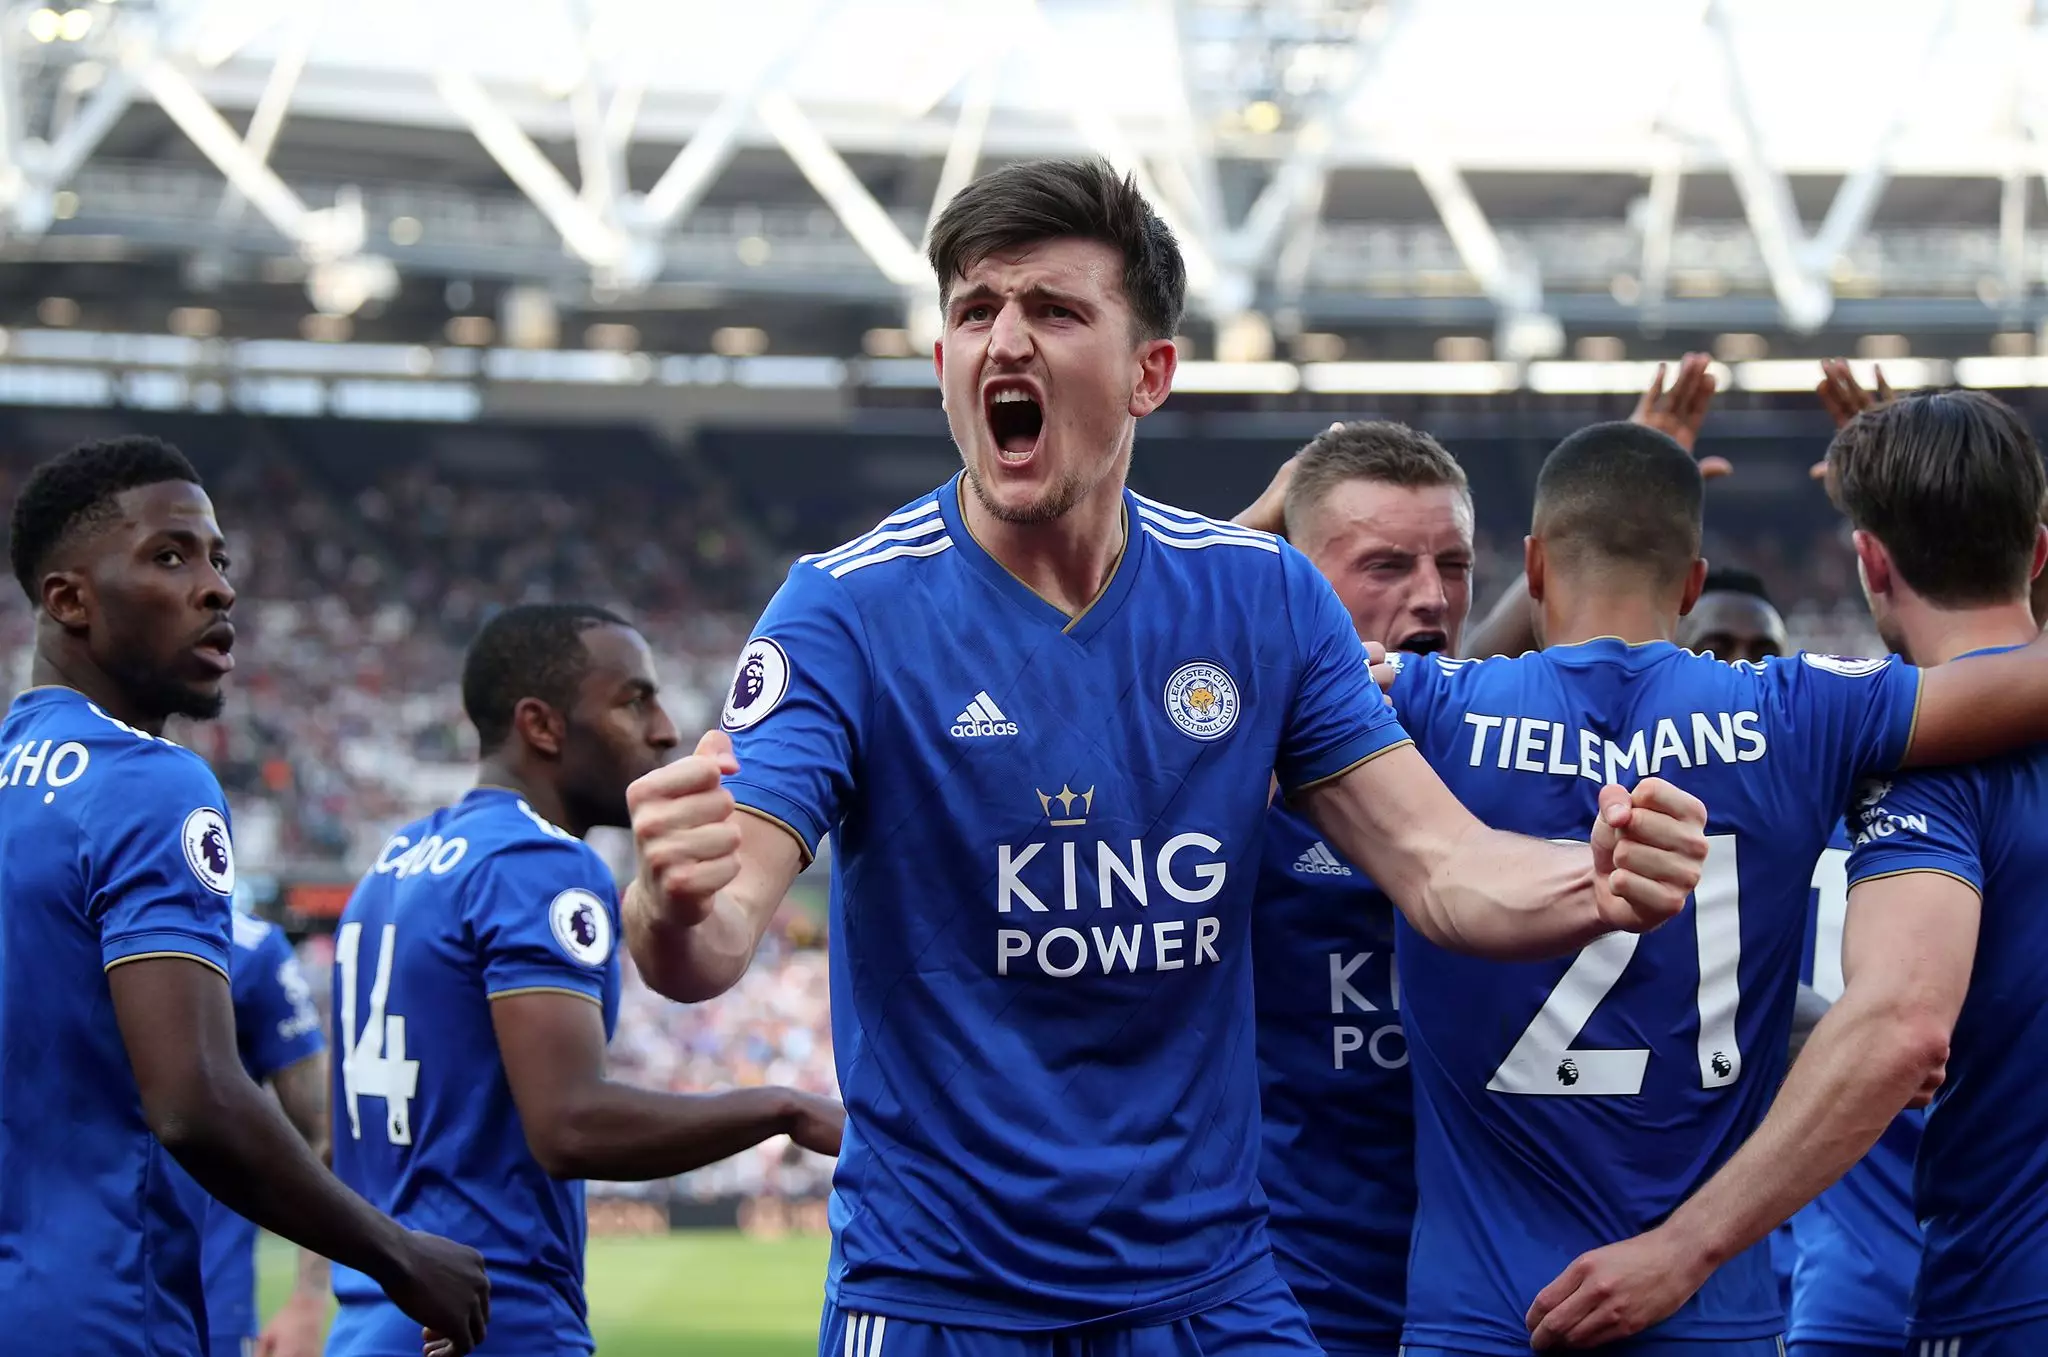 Some reports have said United would need to pay £80 million for Maguire. Image: PA Images